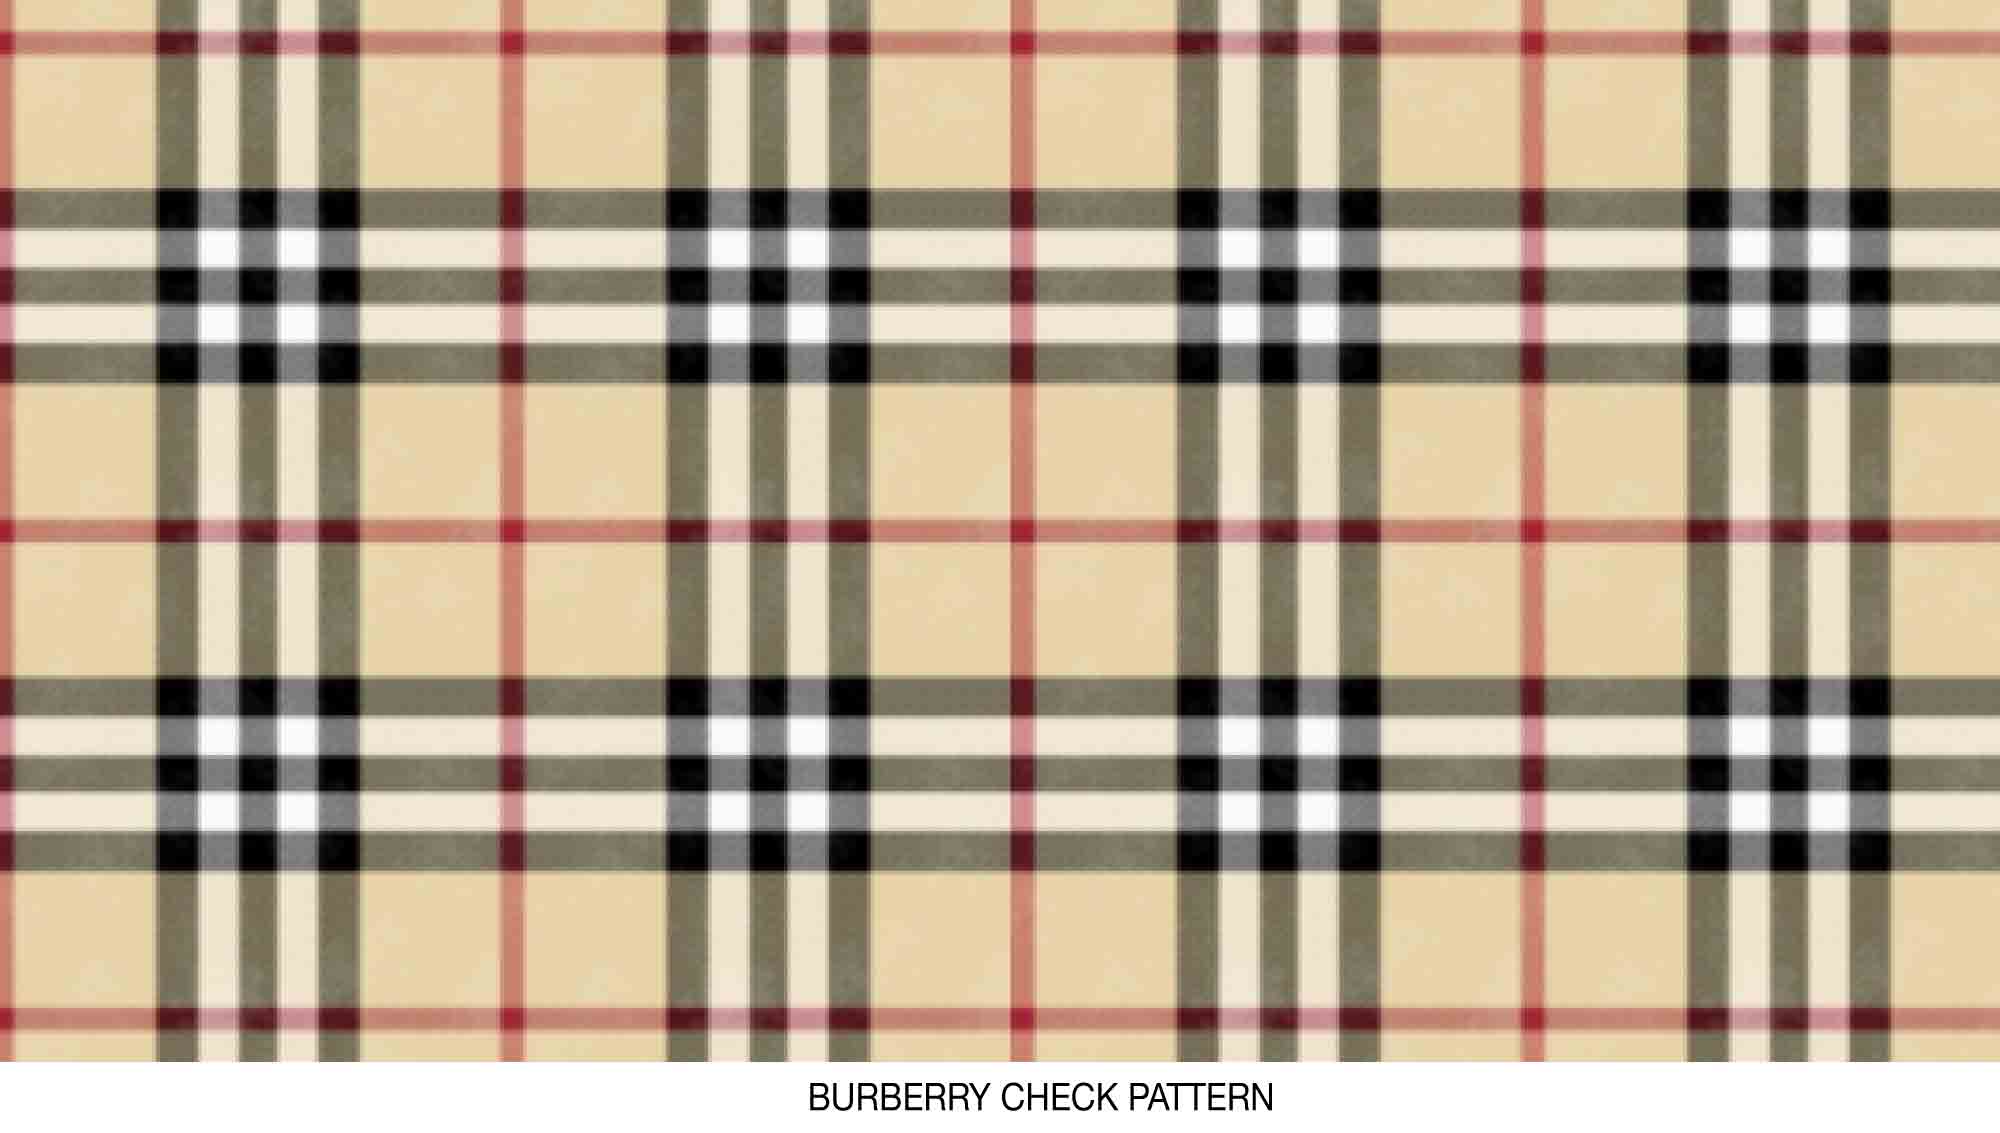 Burberry's New Course | Articles | LogoLounge